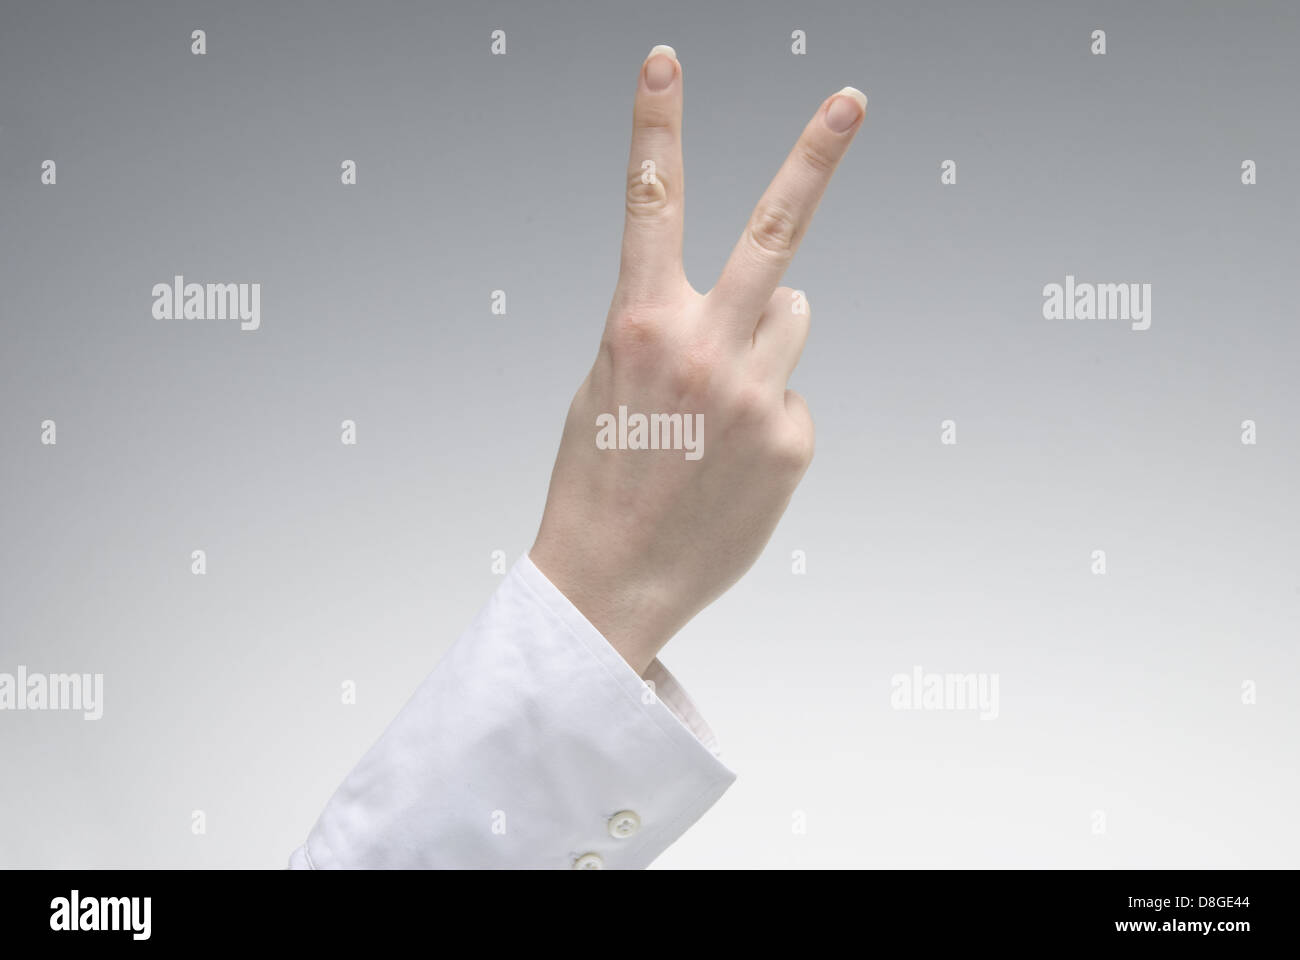 Woman's hand showing Victory symbol Stock Photo